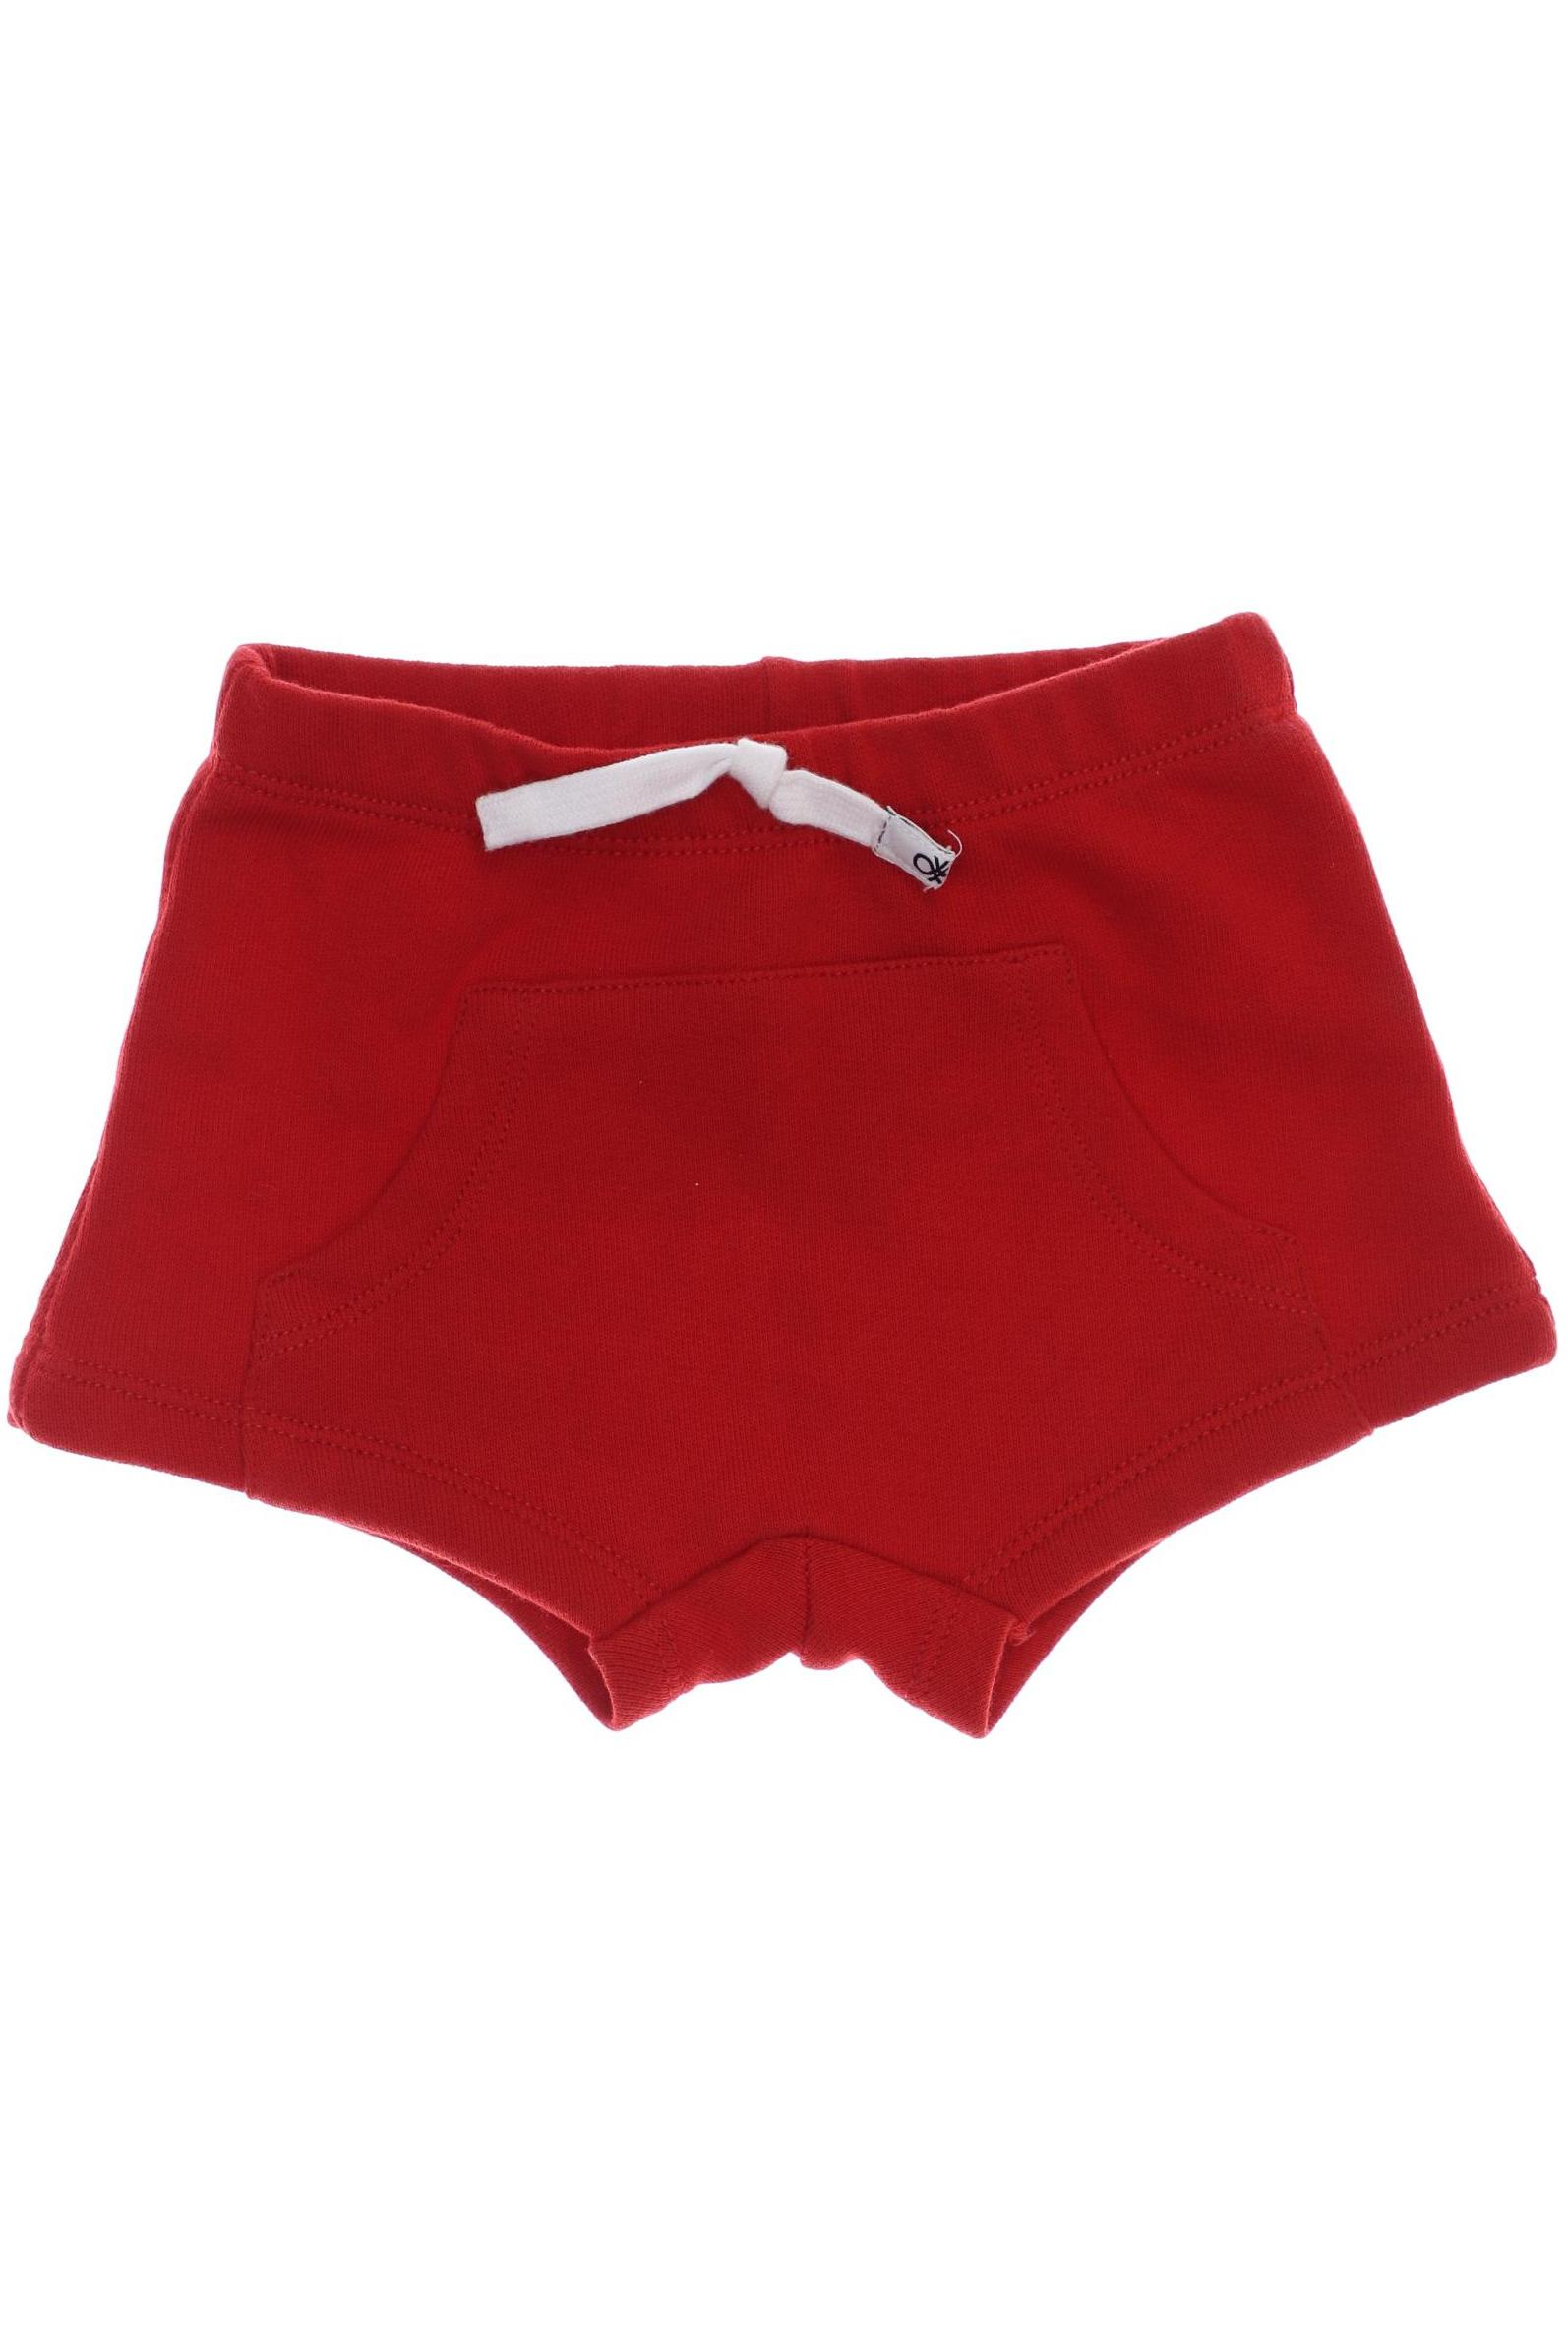 UNITED COLORS OF BENETTON Jungen Shorts, rot von United Colors of Benetton